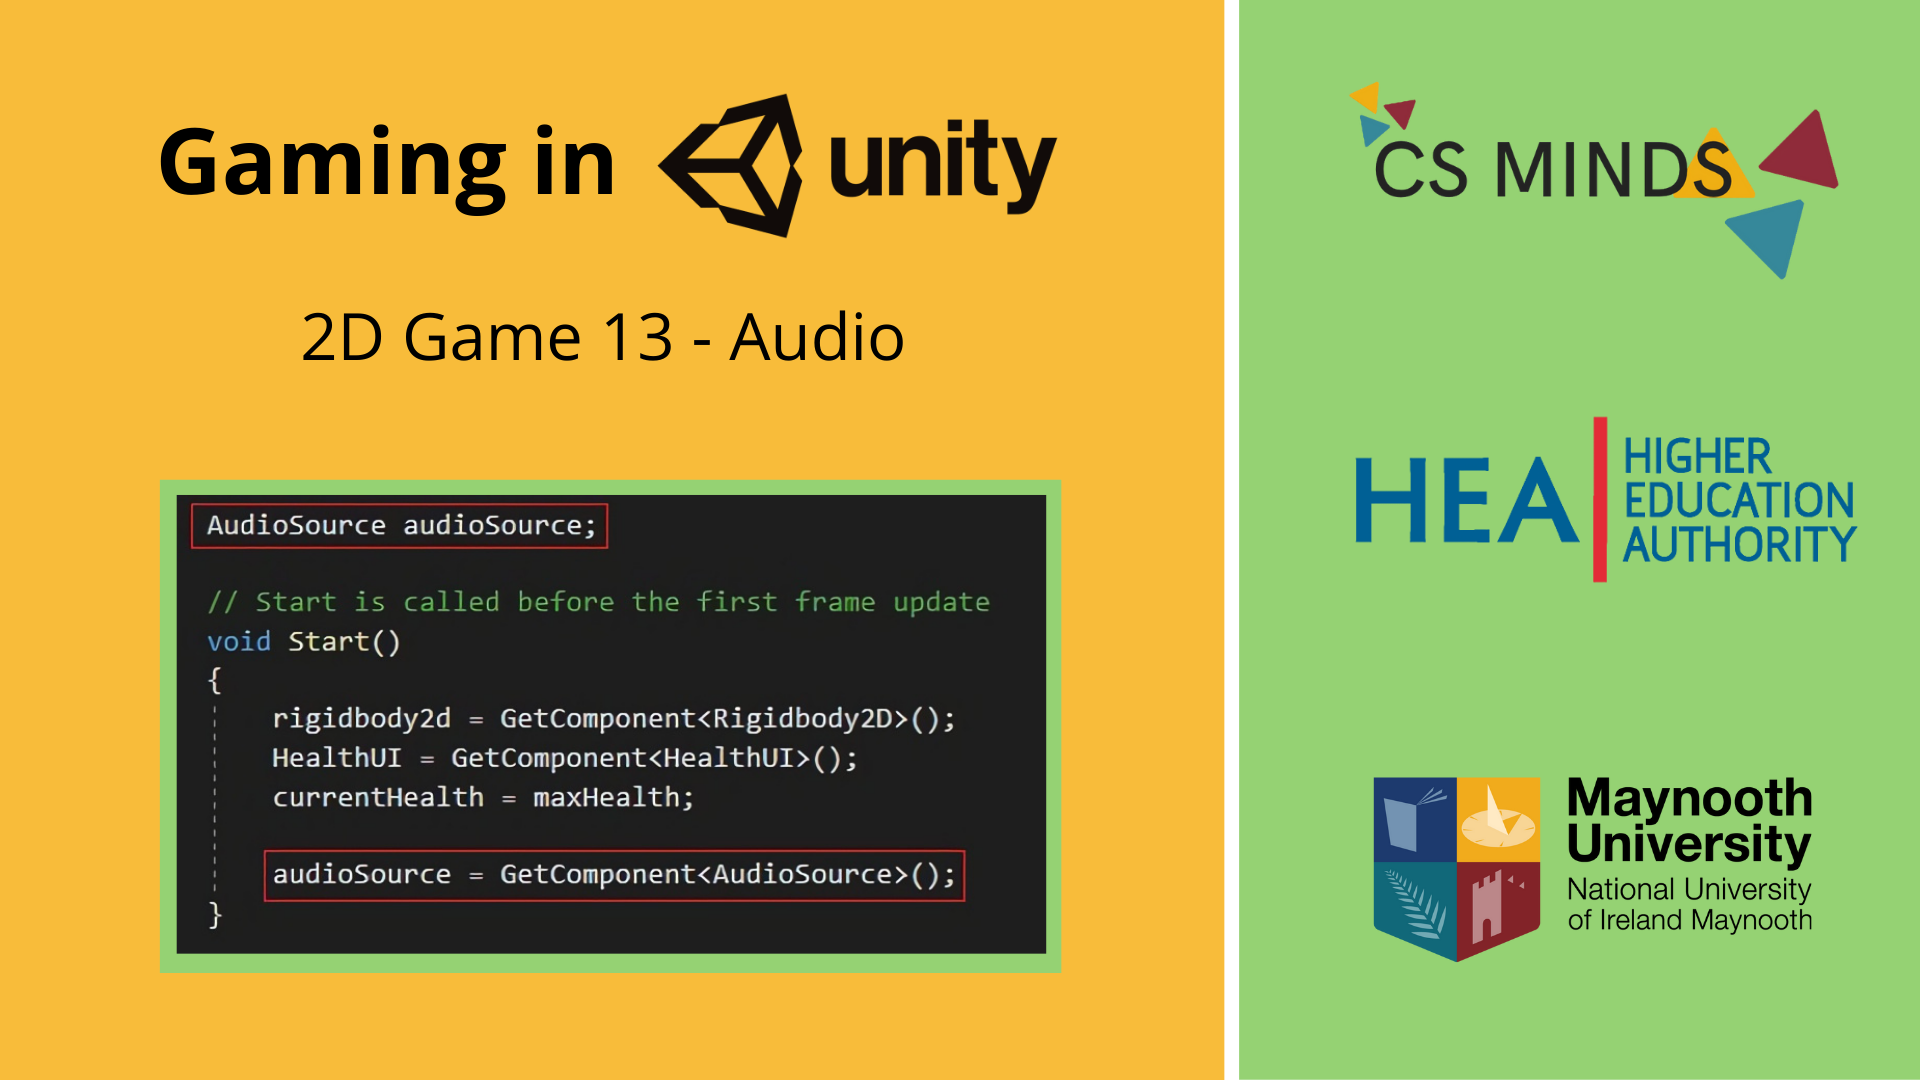 (../img/unity-17-2d-game-13-audio/2d-game-13-audio-header.png)